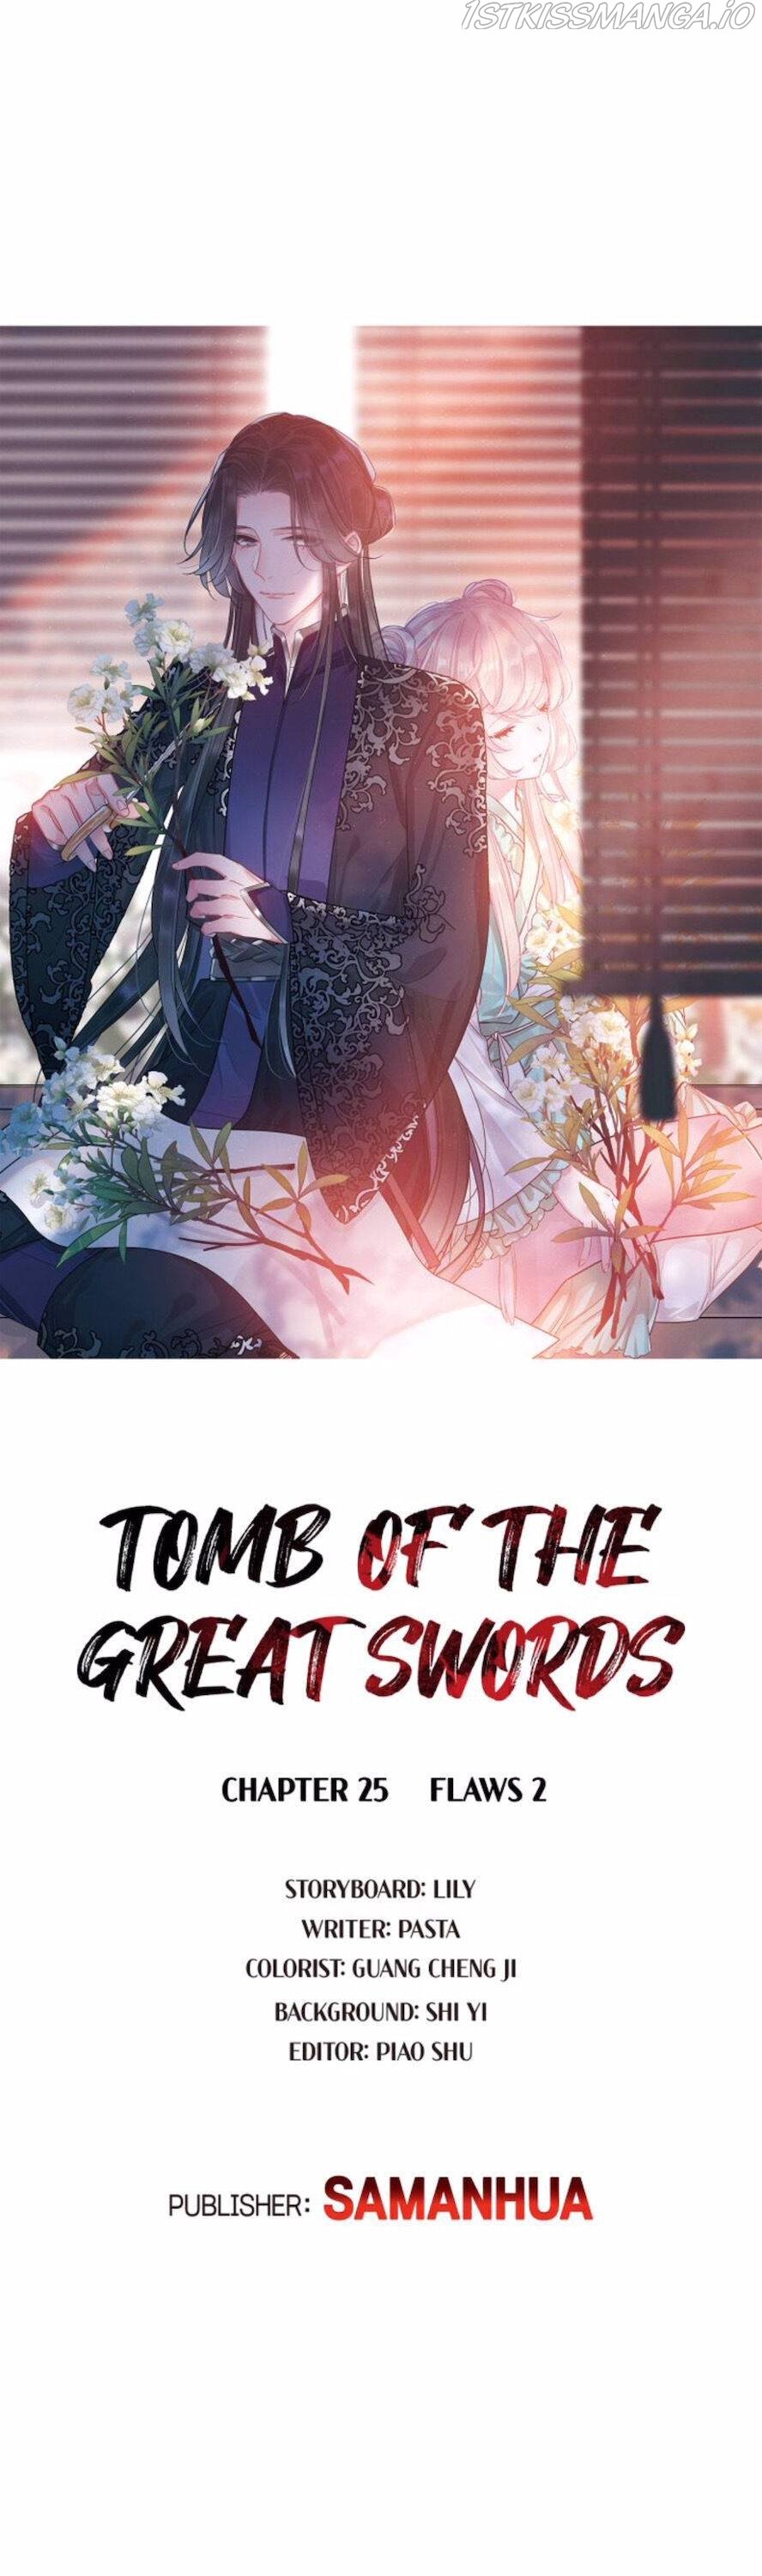 The Tomb of Famed Swords chapter 25